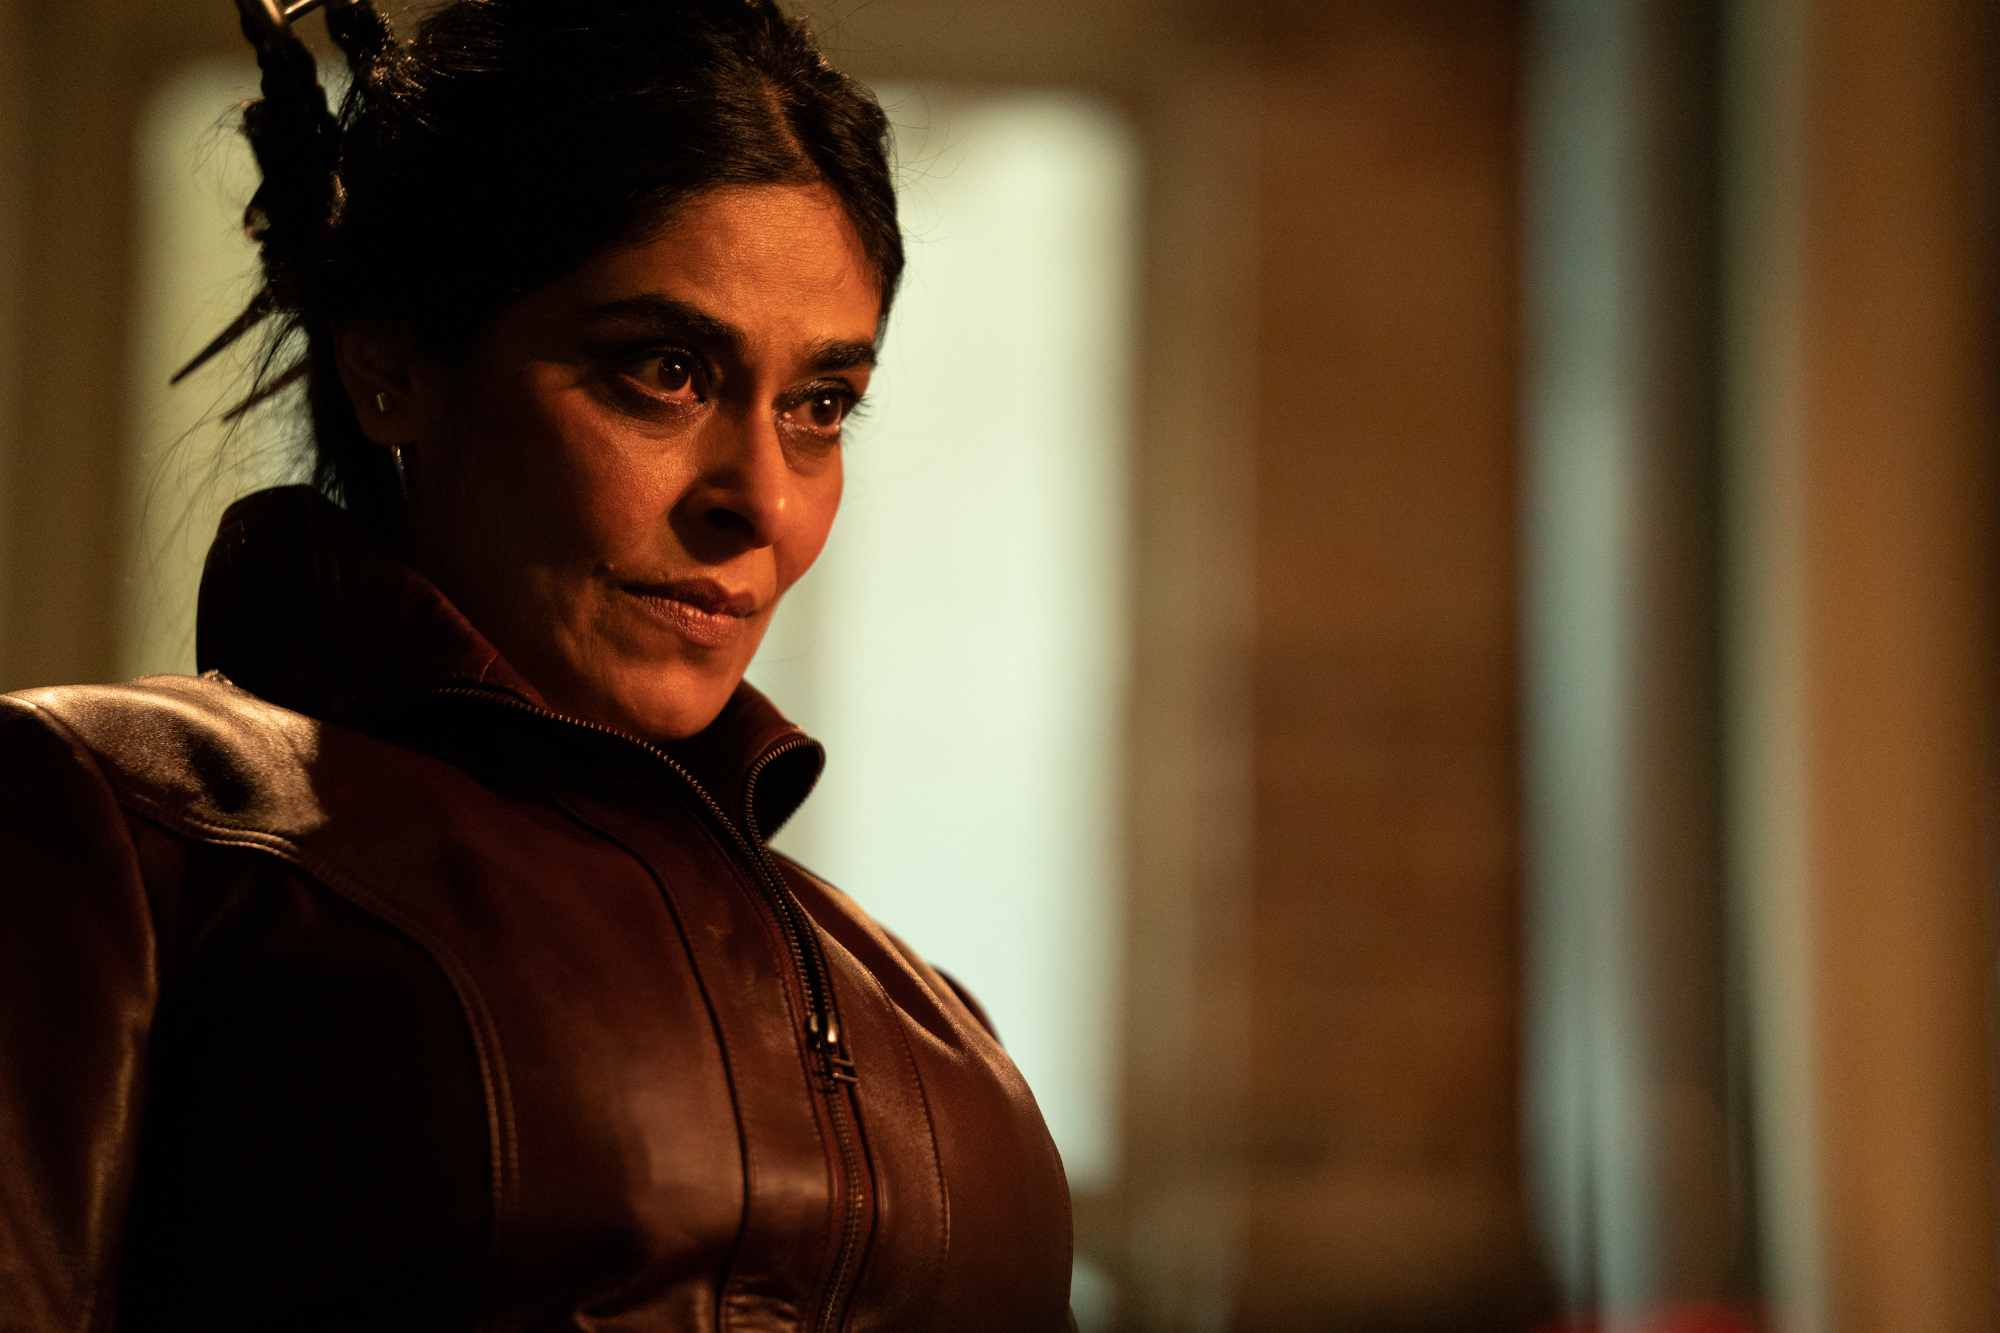 Nimra Bucha as Najma in 'Ms. Marvel,' which has an episode 4 release date of June 29. Her hair is pulled back and she's standing in a dimly lit room.